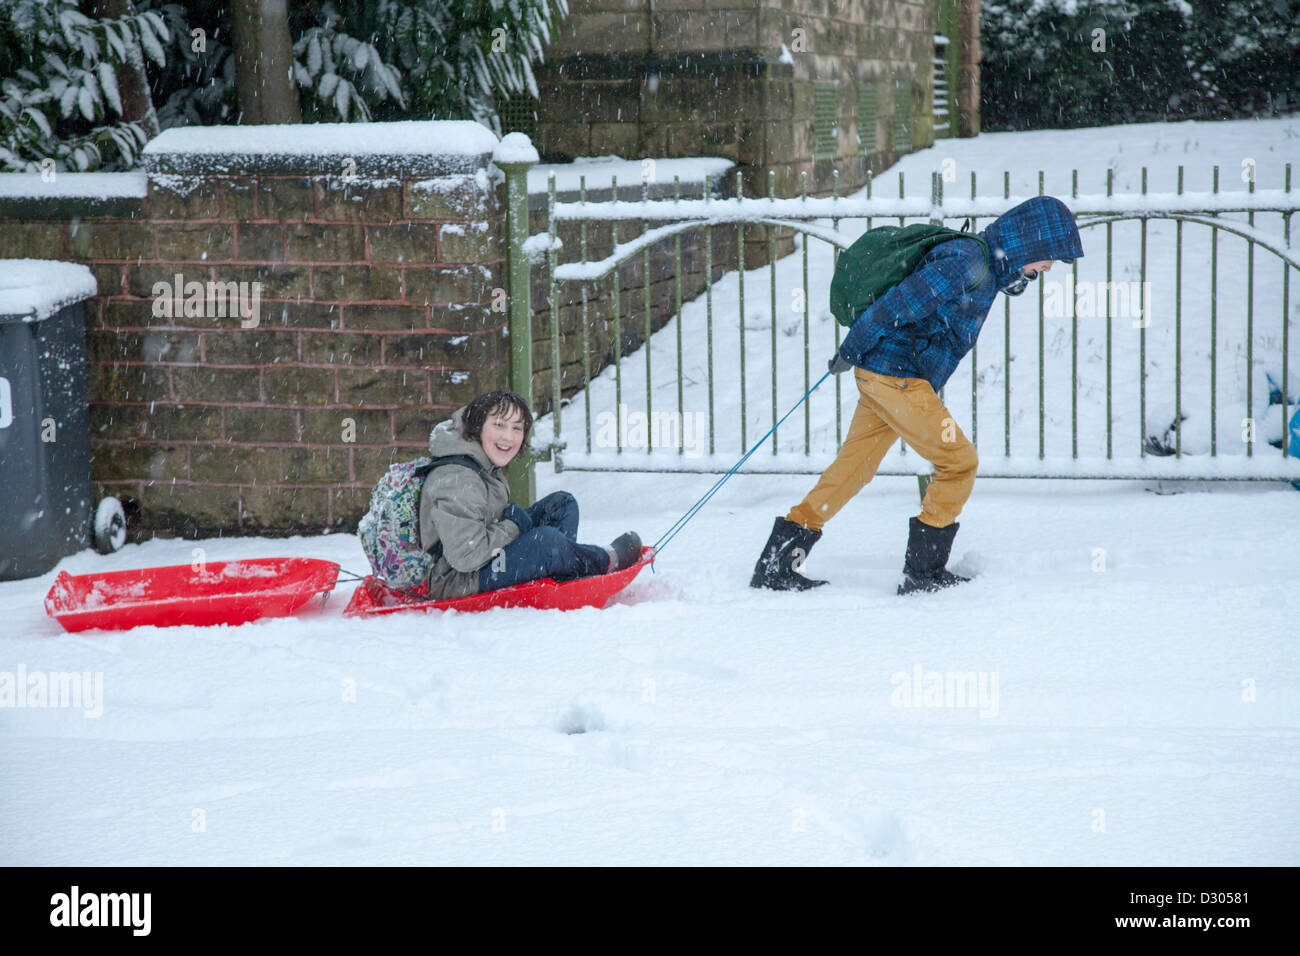 Sheffield, South Yorkshire, UK. 5th February 2013. Heavy snowfall at the beginning of the rush hour this morning. People struggled to get to school and work and traffic crawled down the main roads whilst side streets were all but impassible. Credit:  Eric Murphy / Alamy Live News Stock Photo